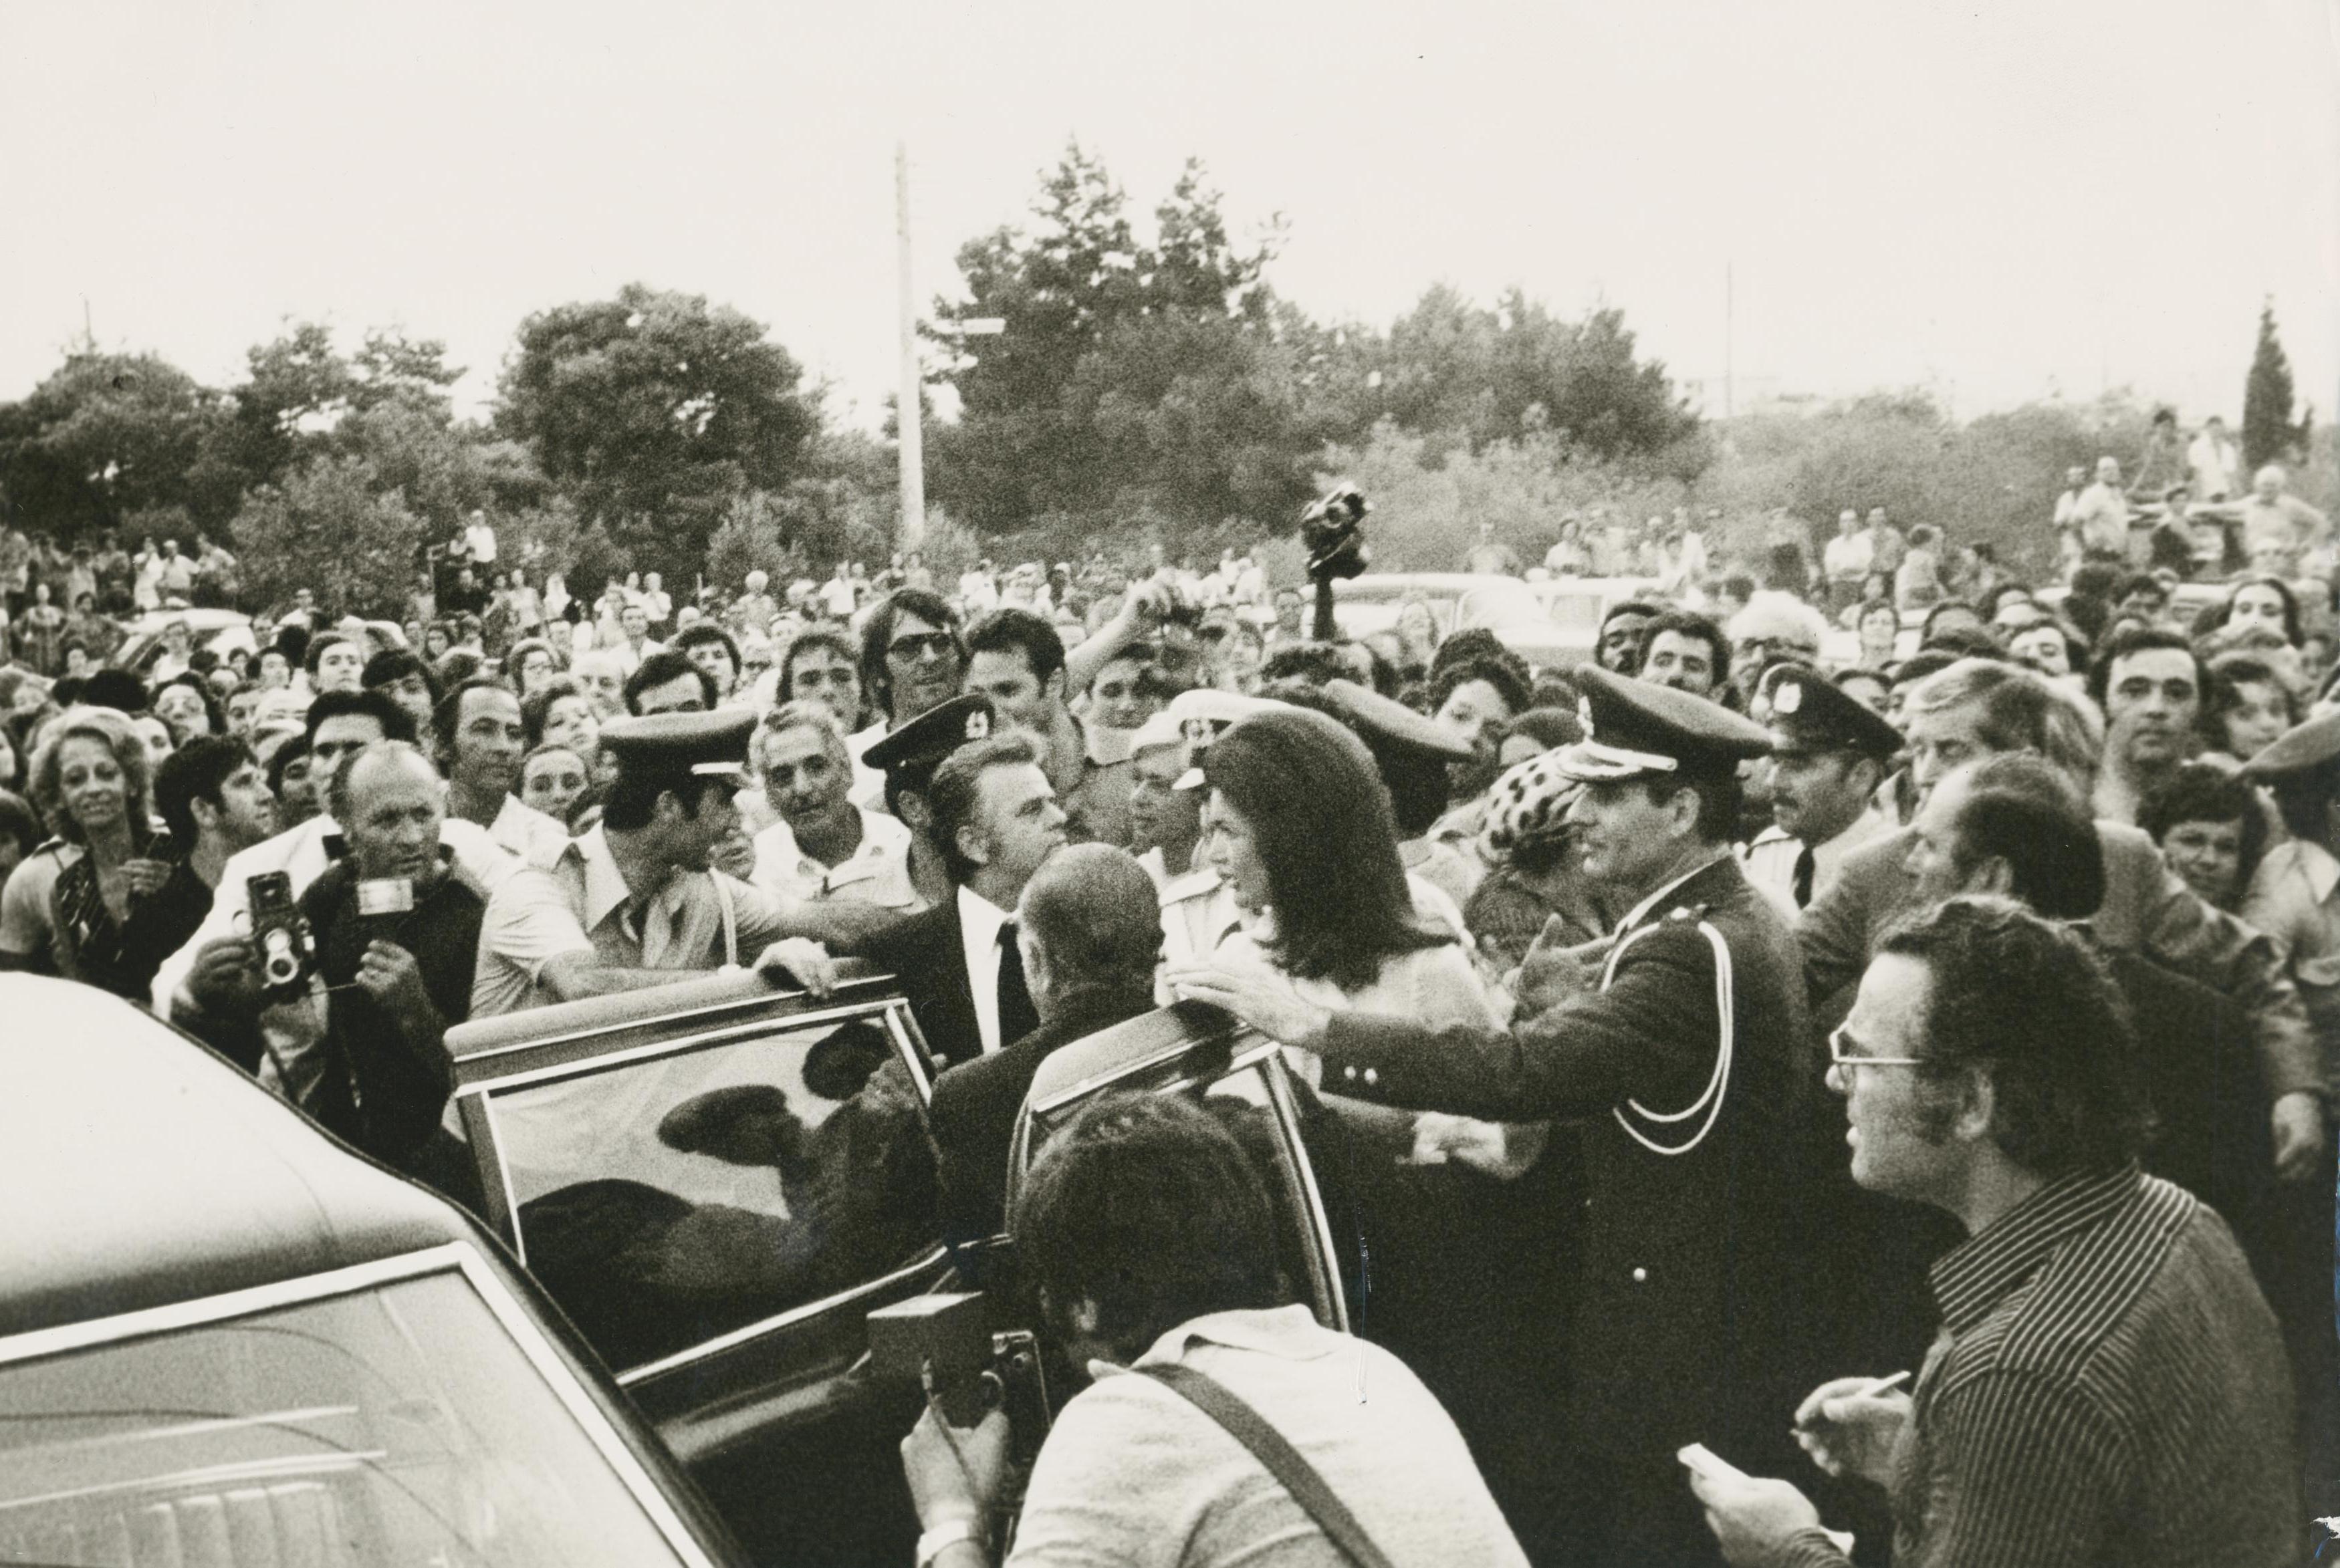 Jackie Kennedy; People; Crowd; Black and White, 1970s, 20, 2 x 29, 9 cm - Art by Unknown